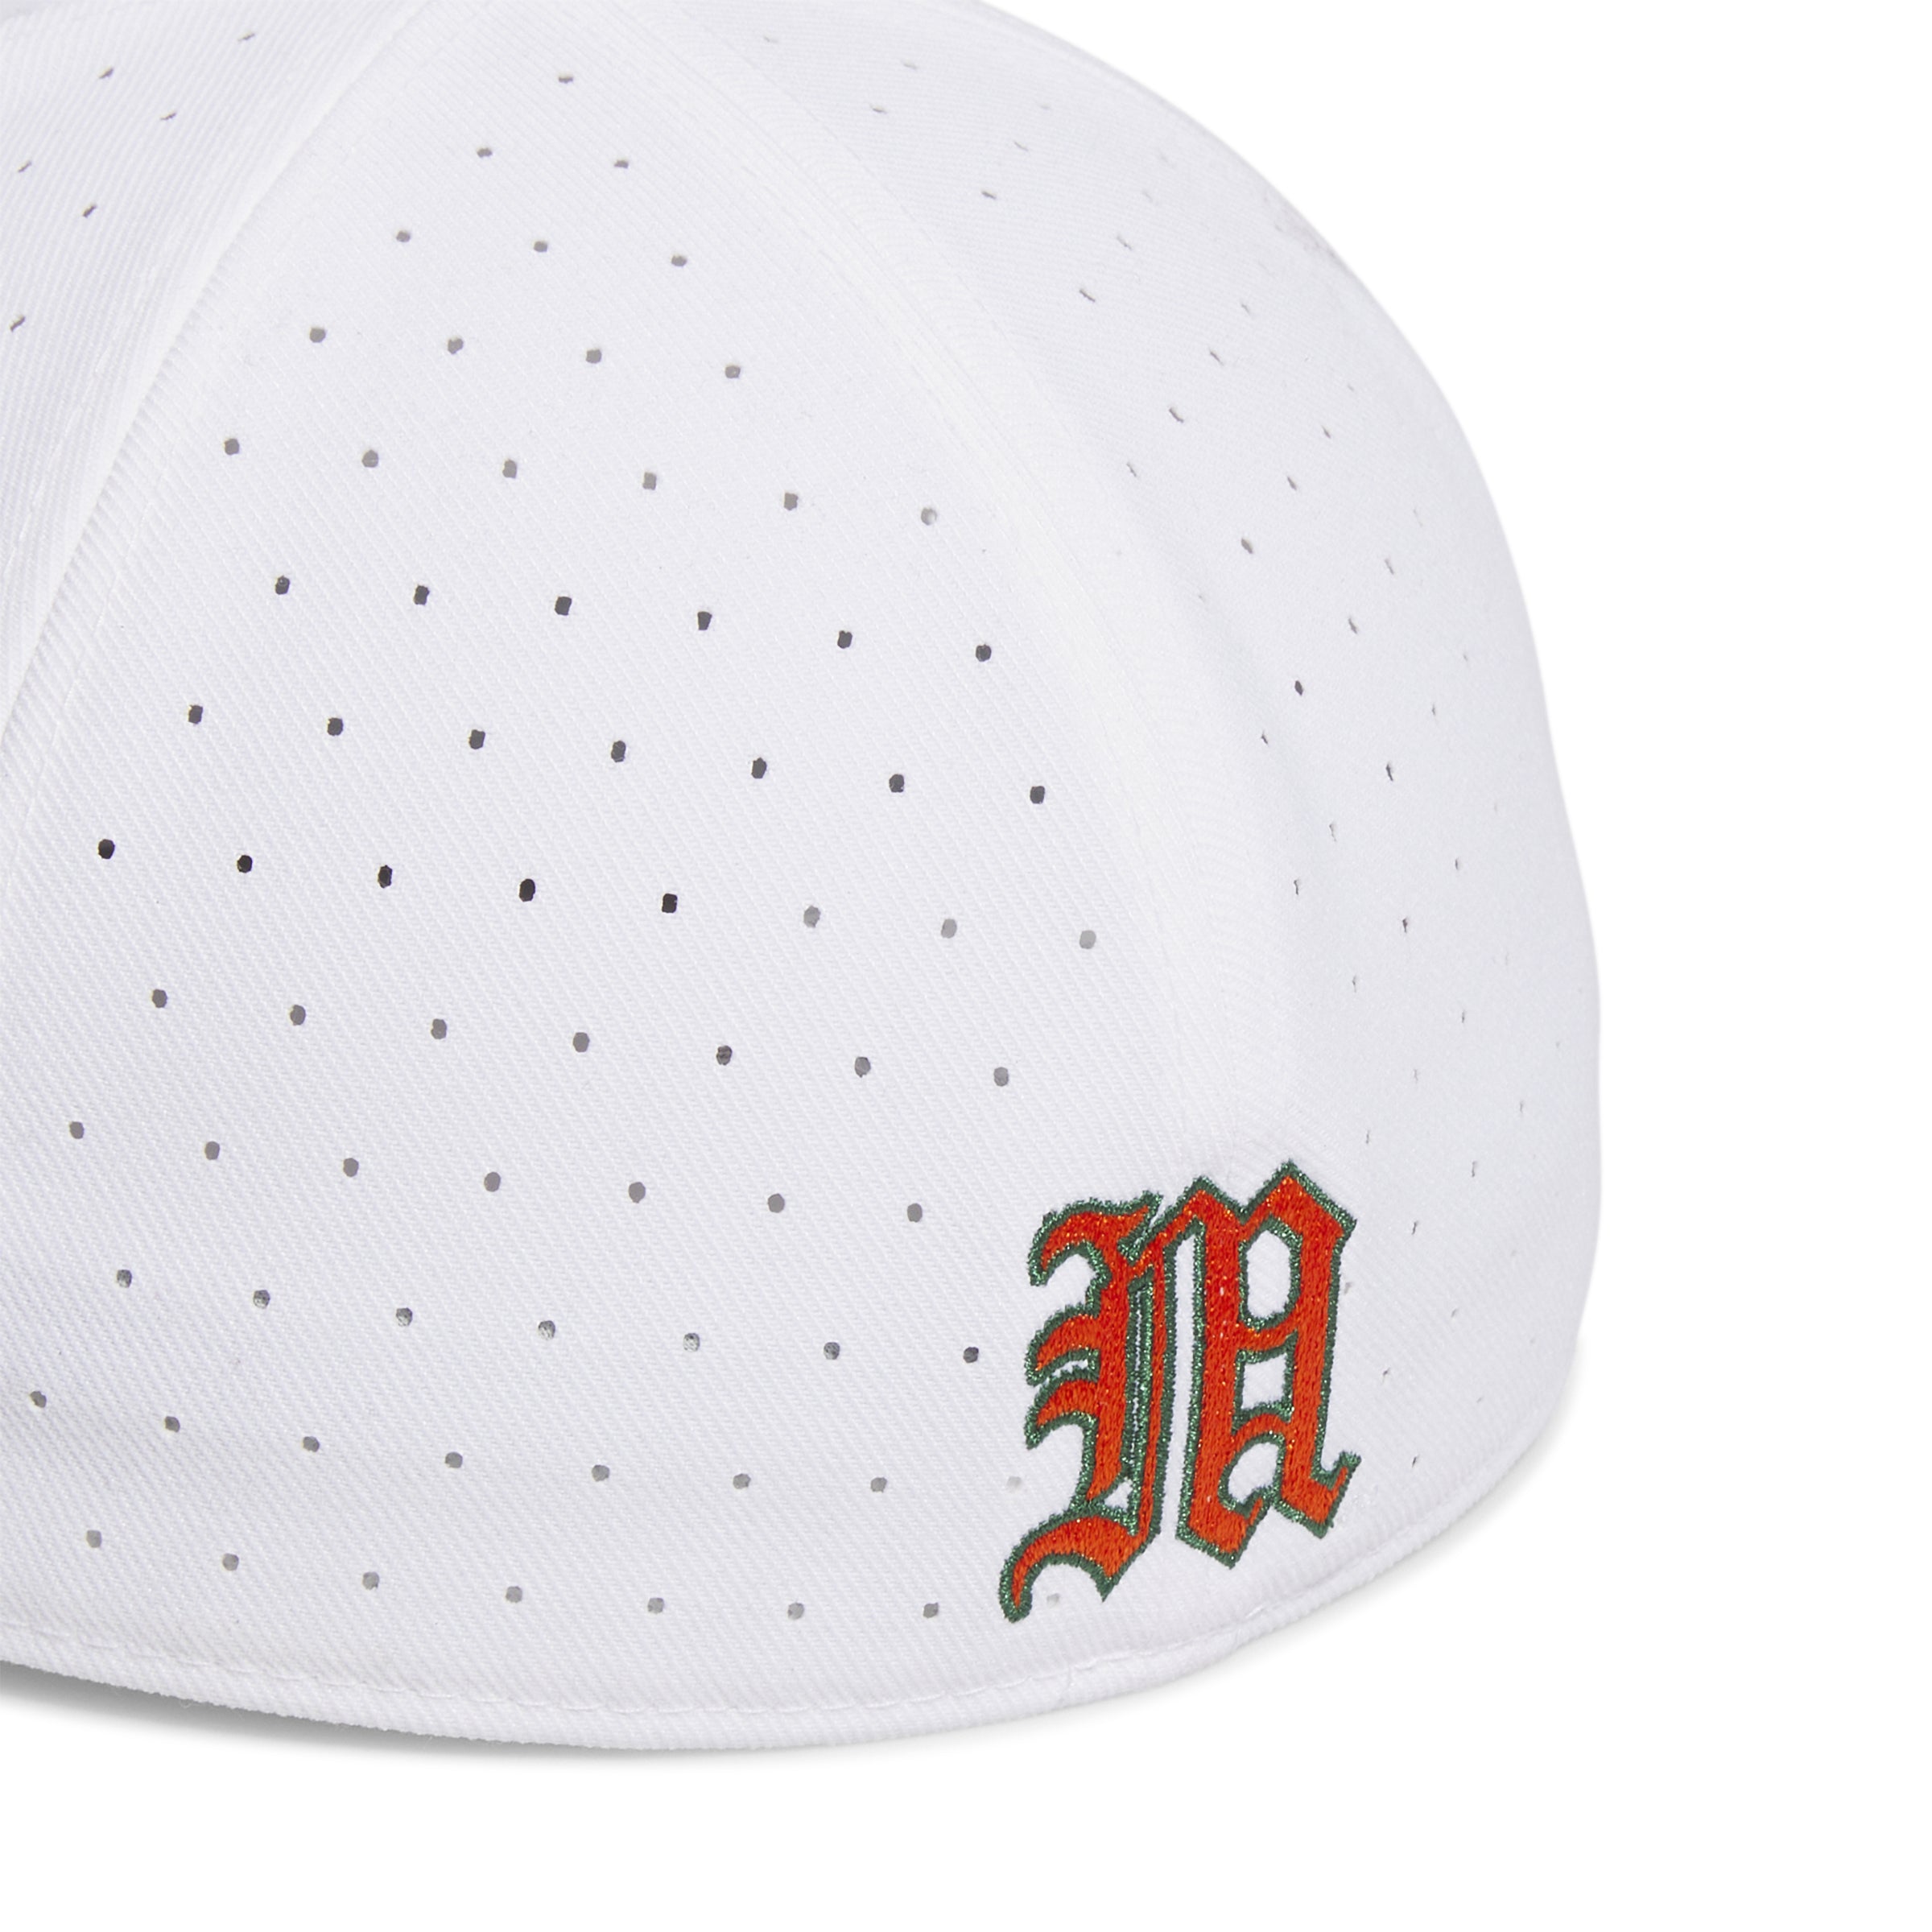 Miami Hurricanes adidas On Field Maniac Perforated Fitted Baseball Hat - White